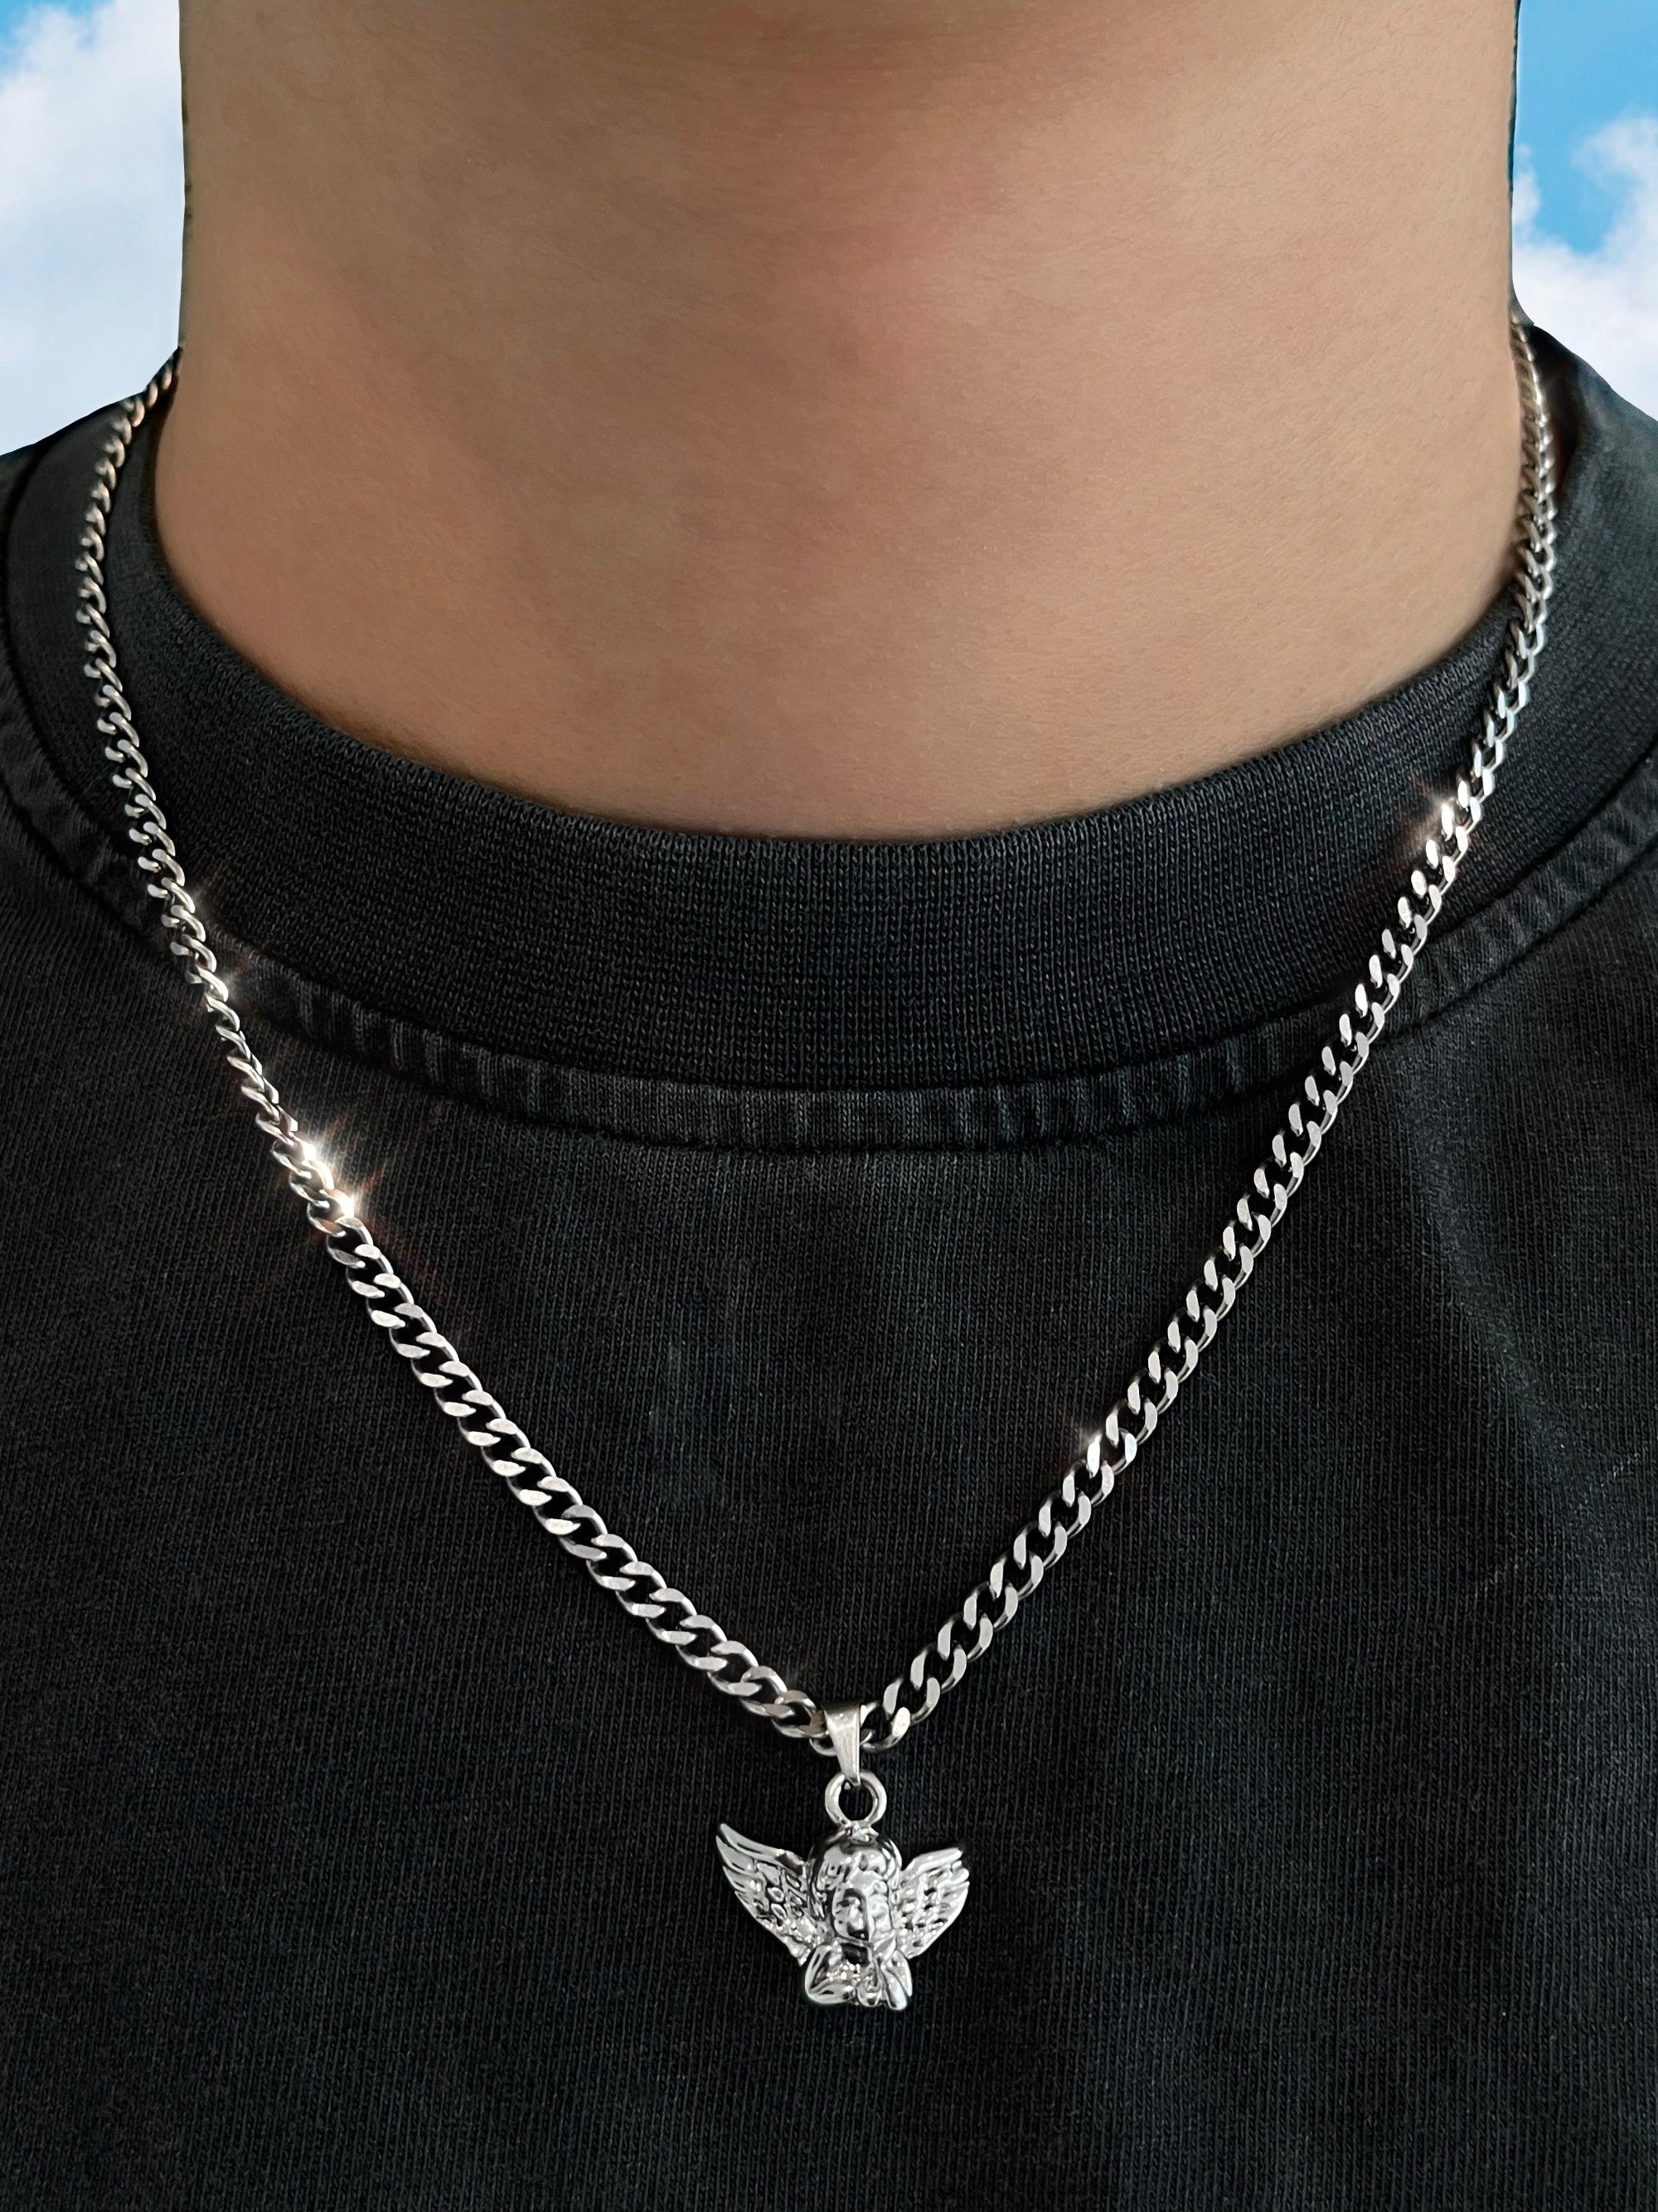 2.0 ANGEL BABY CHAIN NECKLACE